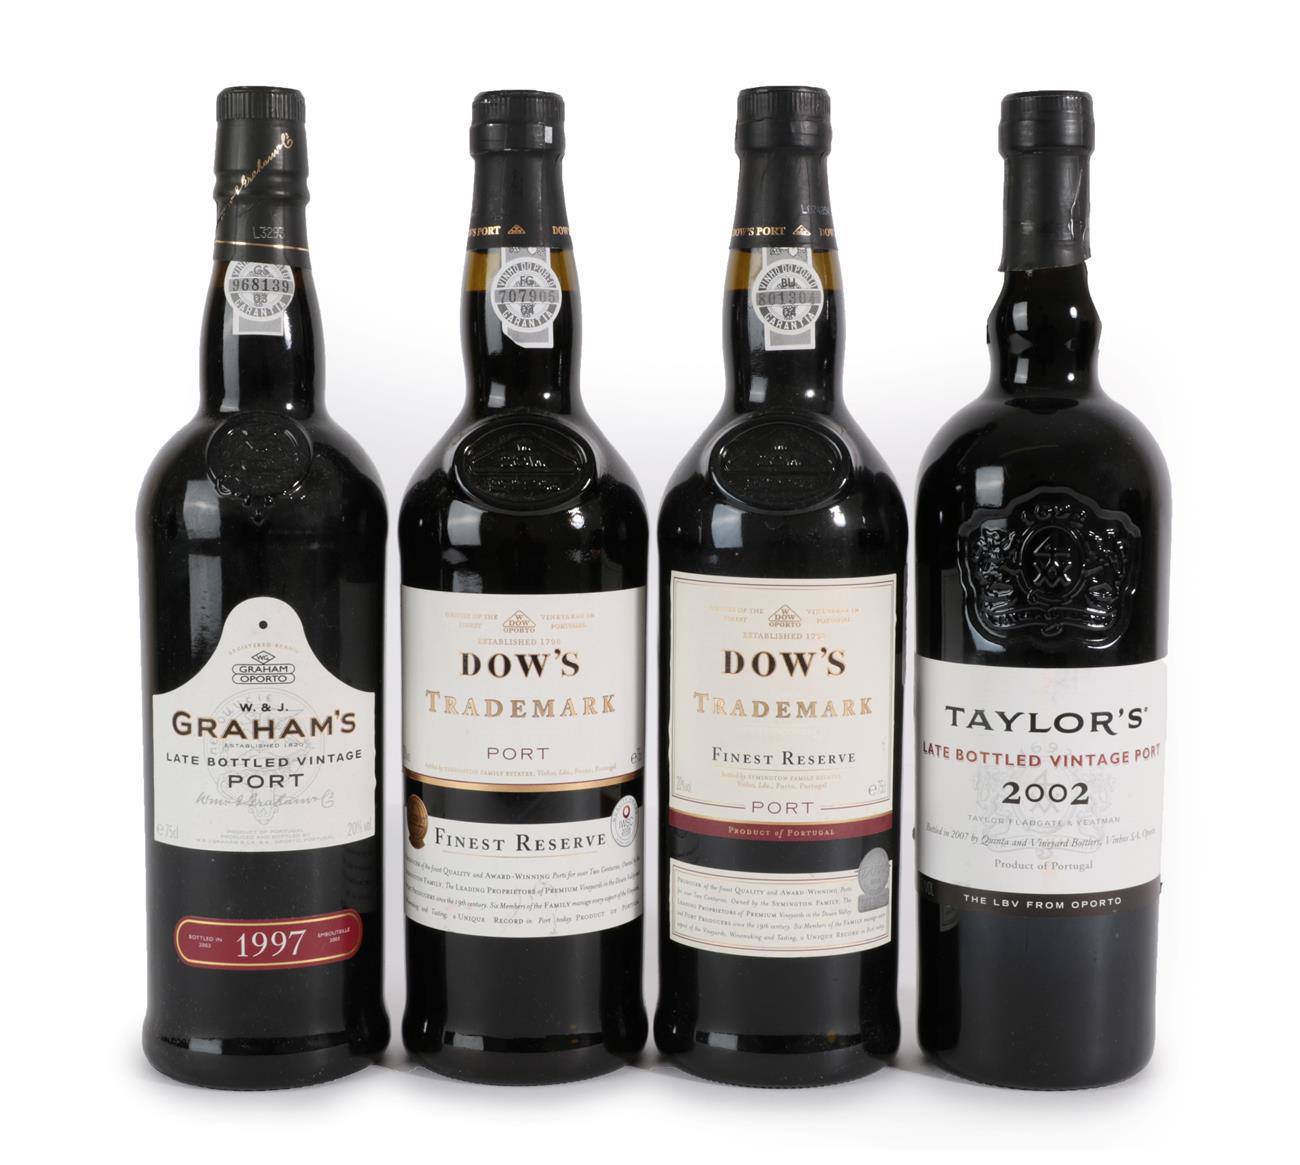 Dow's Trademark Finest Reserve Port (two bottles),